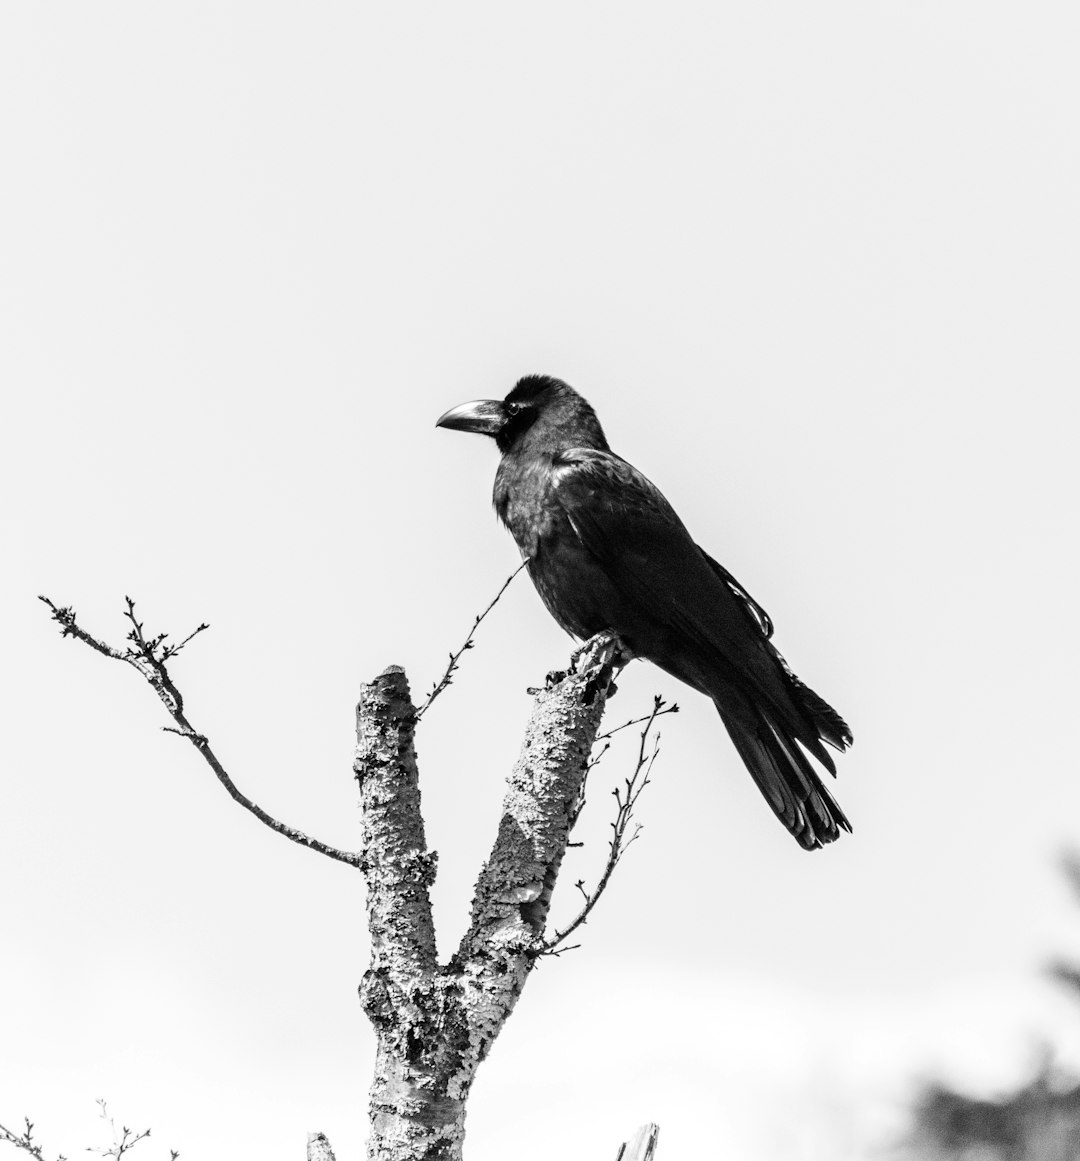 grayscale photography of bird fetched on tree branch